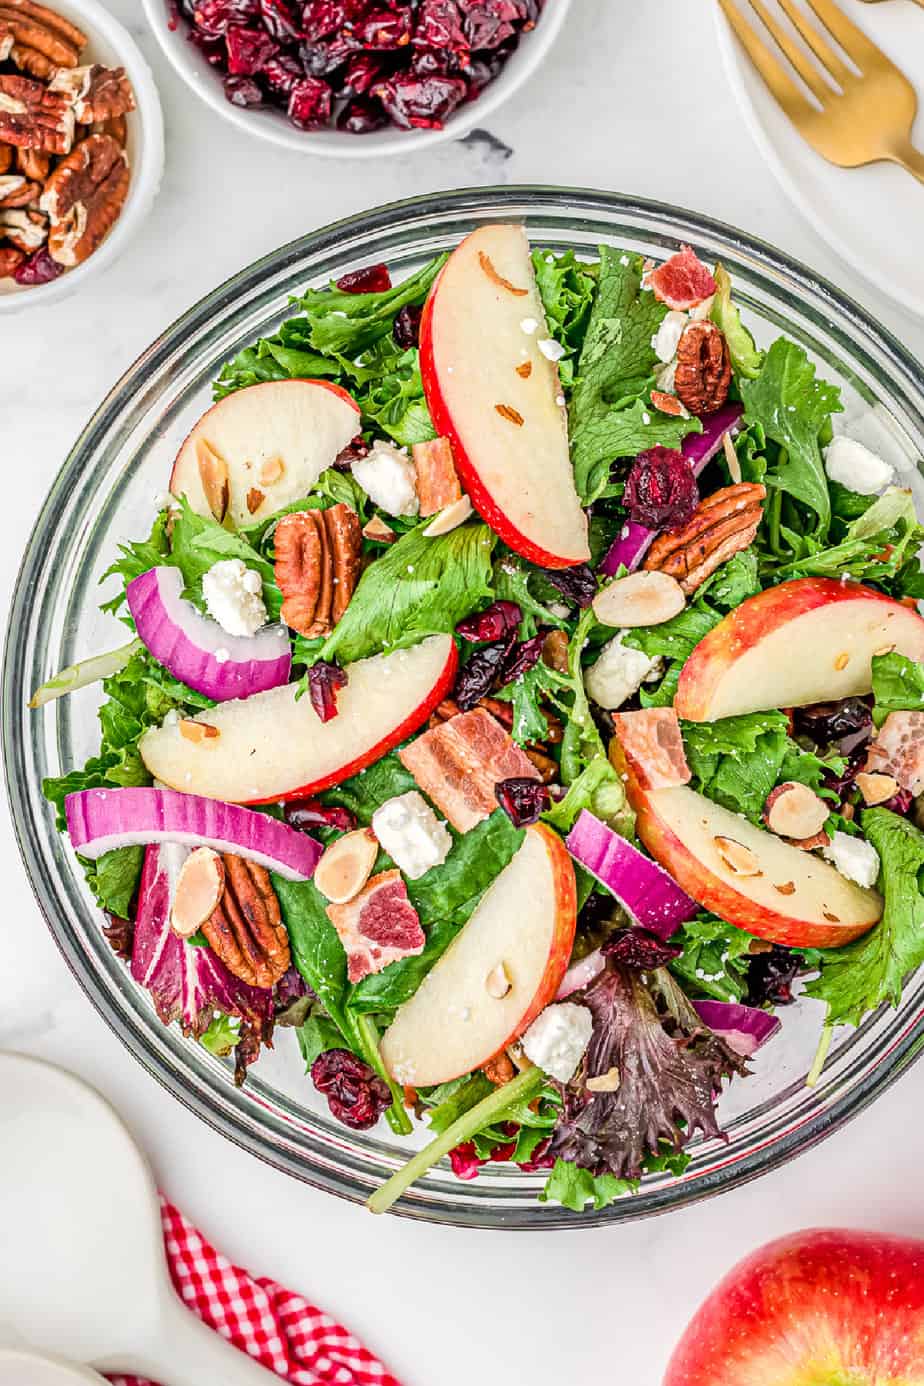 Cranberry apple salad in a large serving bowl from overhead with dried cranberries, pecans, fresh apples and forks on the table nearby.